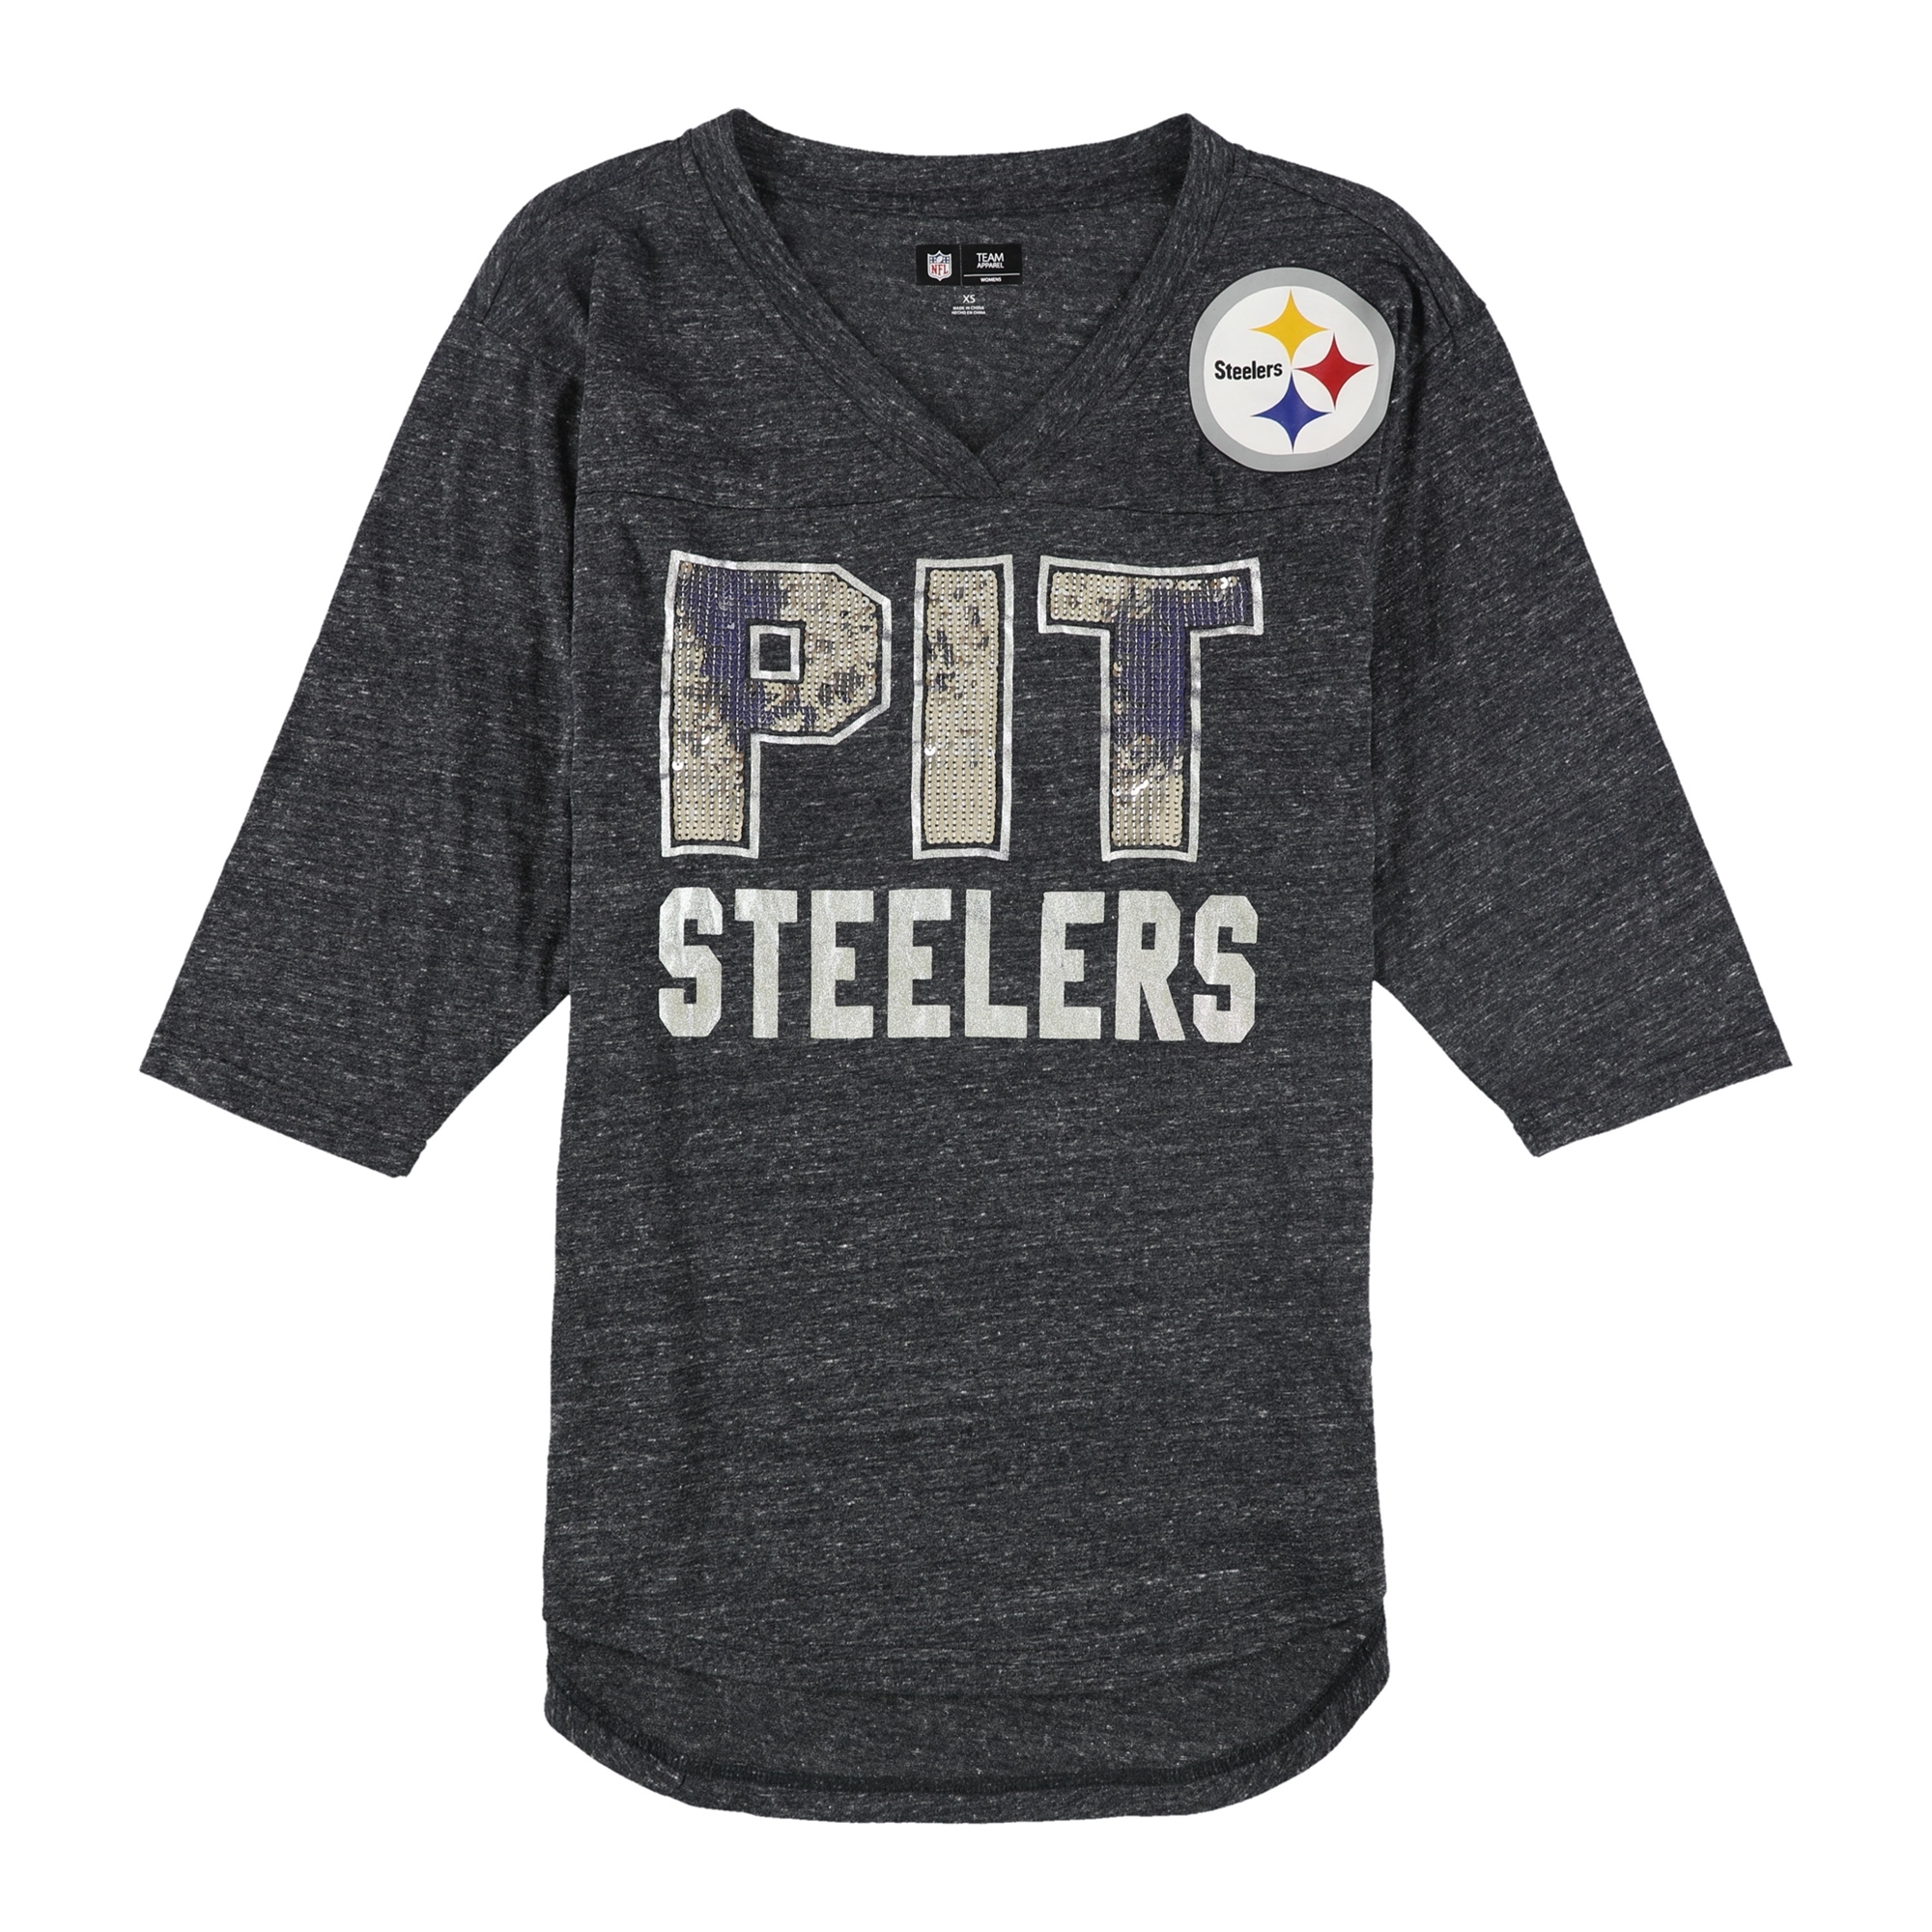 NFL Womens Pittsburgh Steelers Embellished T-Shirt, Grey, X-Small